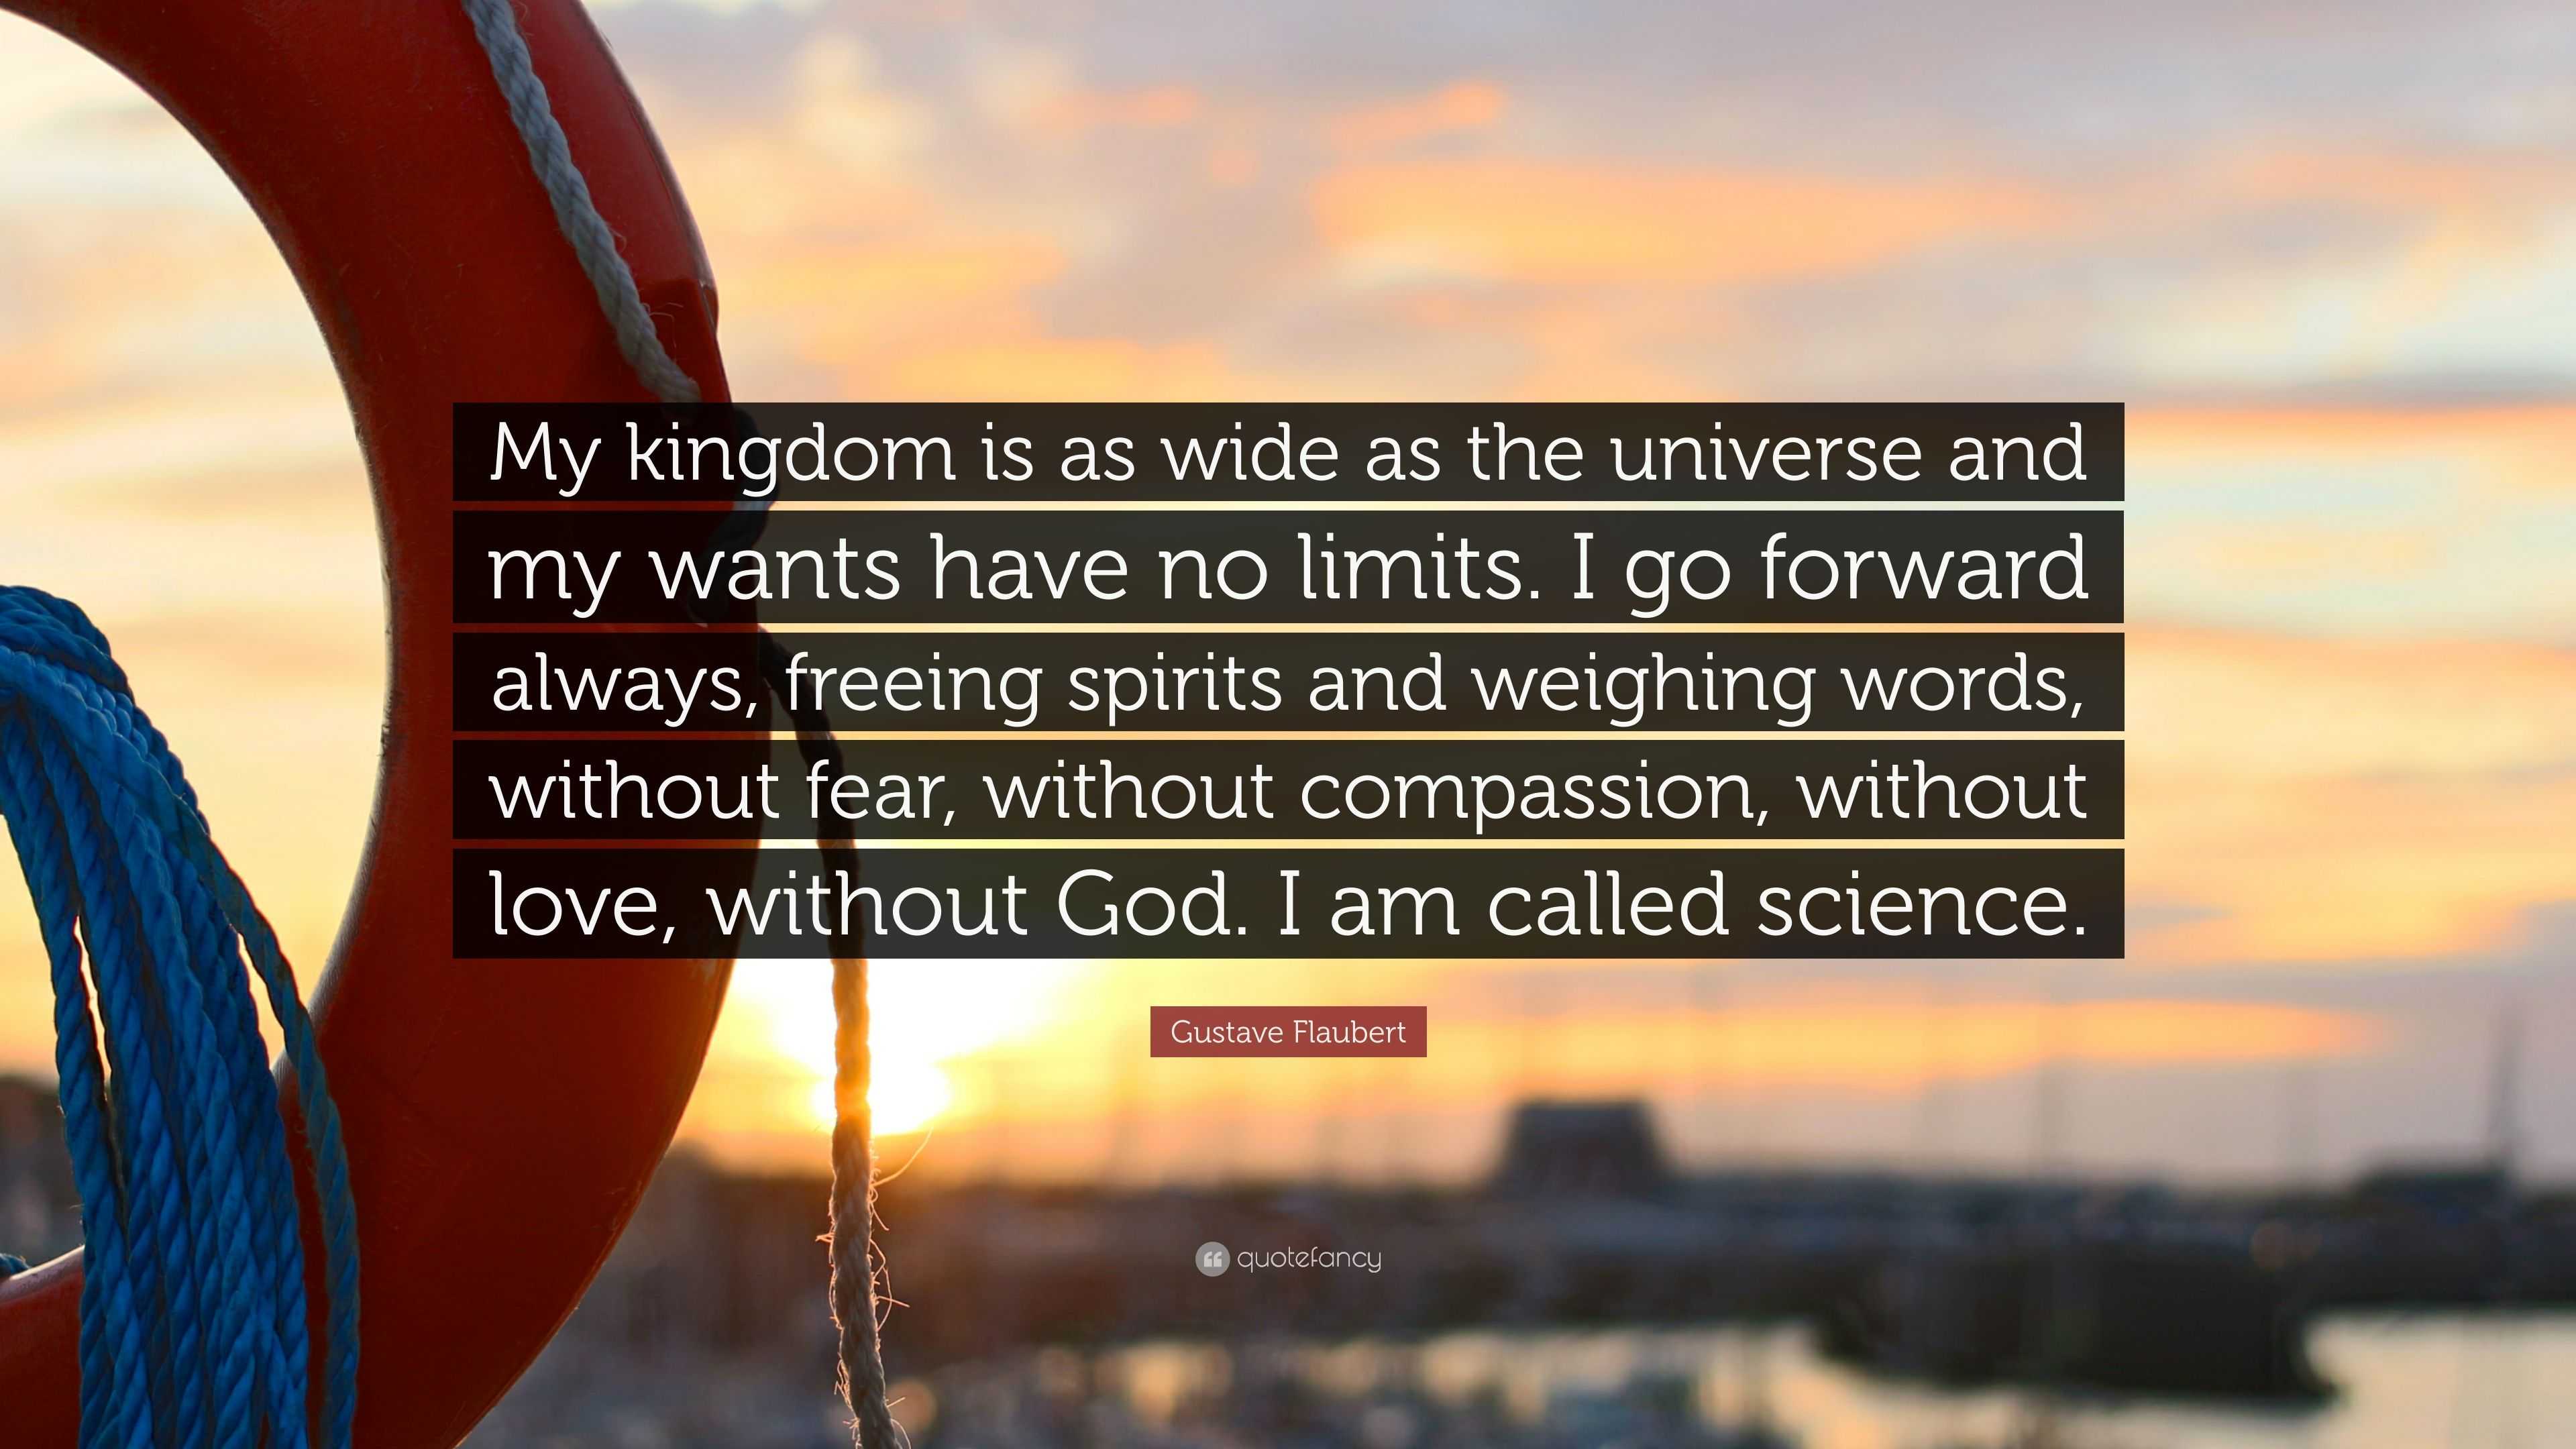 Gustave Flaubert quote: My kingdom is as wide as the universe and